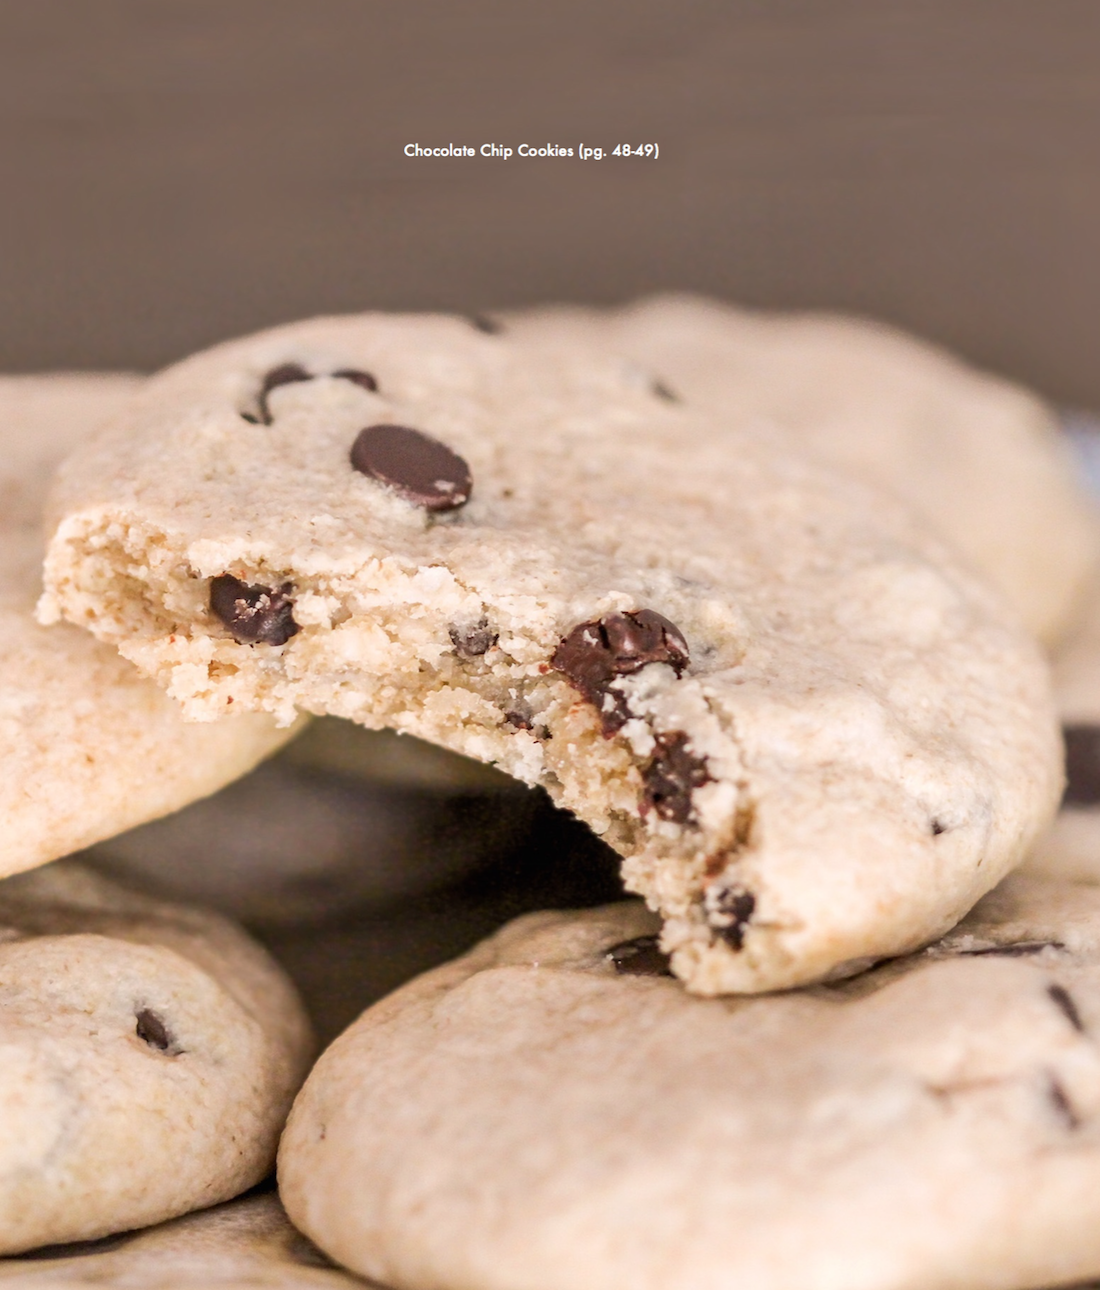 Healthy Chewy Chocolate Chip Cookies recipe (refined sugar free, gluten free, dairy free, vegan) - Healthy Dessert Recipes at Desserts with Benefits